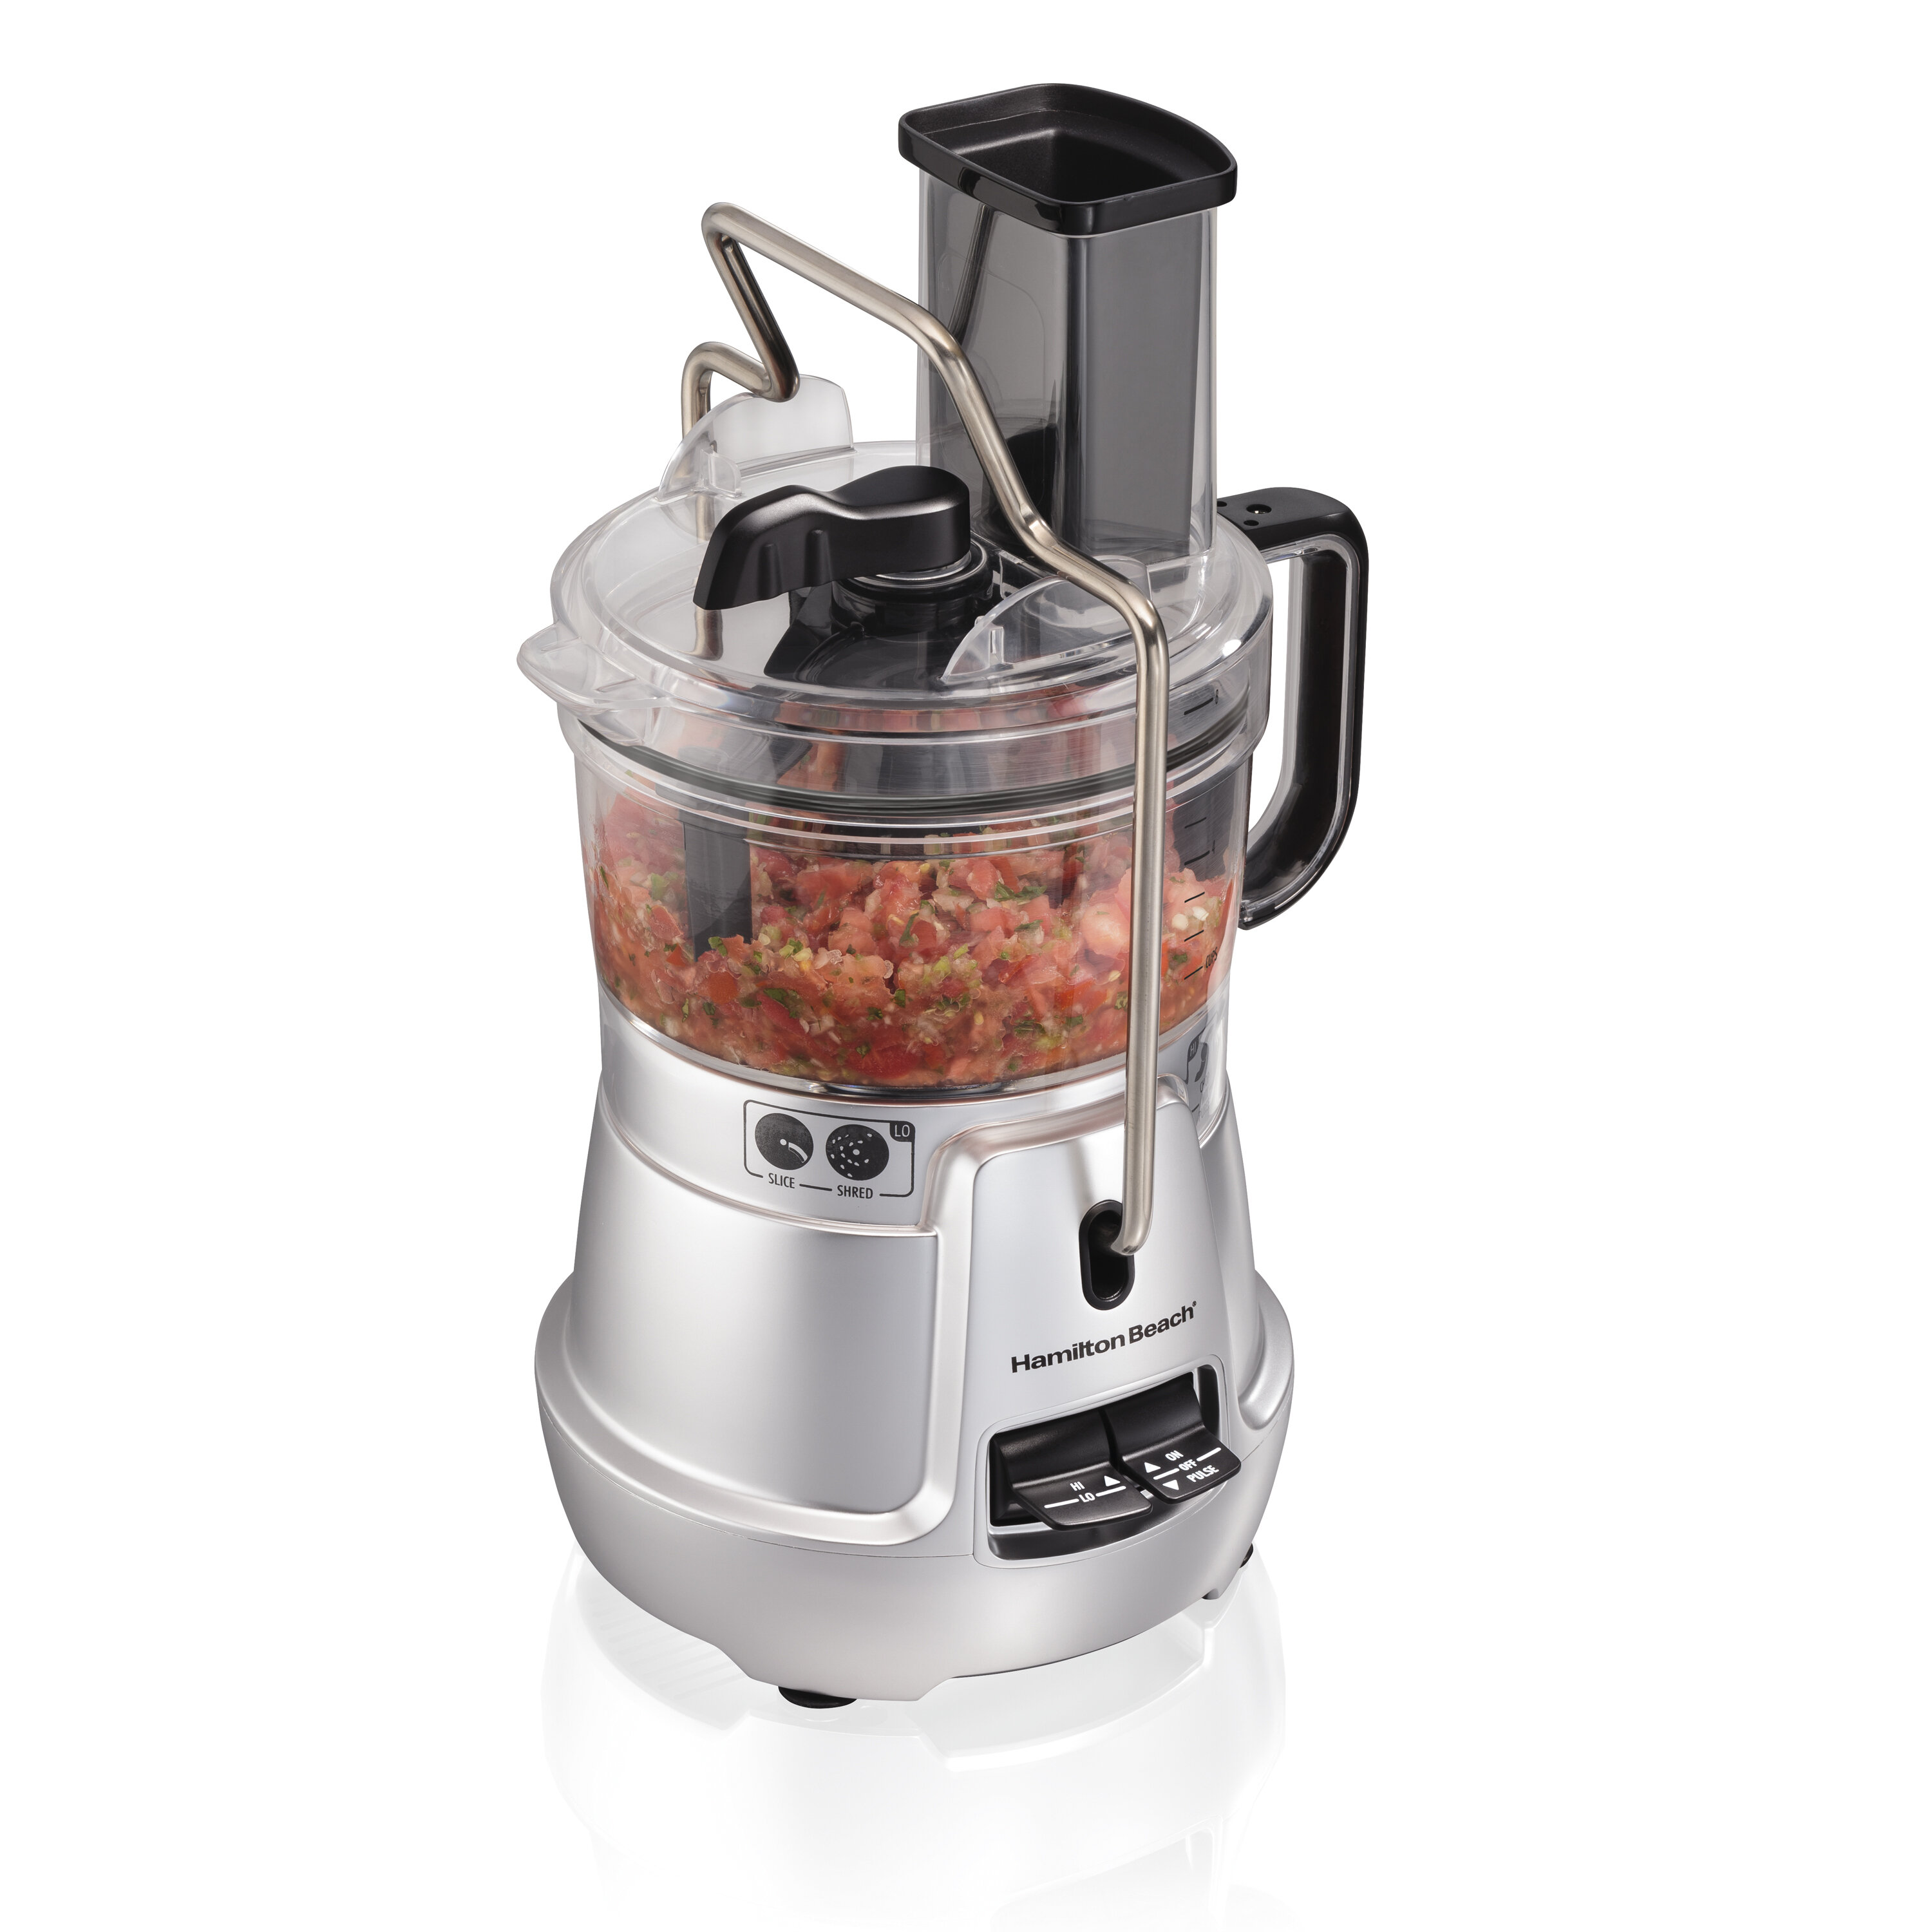 Hamilton Beach Stack ＆ Snap 8-Cup Food Processor ＆ Vegetable Chopper with Adjustable Slicing Blade, Built-in Bowl Scraper ＆ Storage Case, Silver (7 - 3